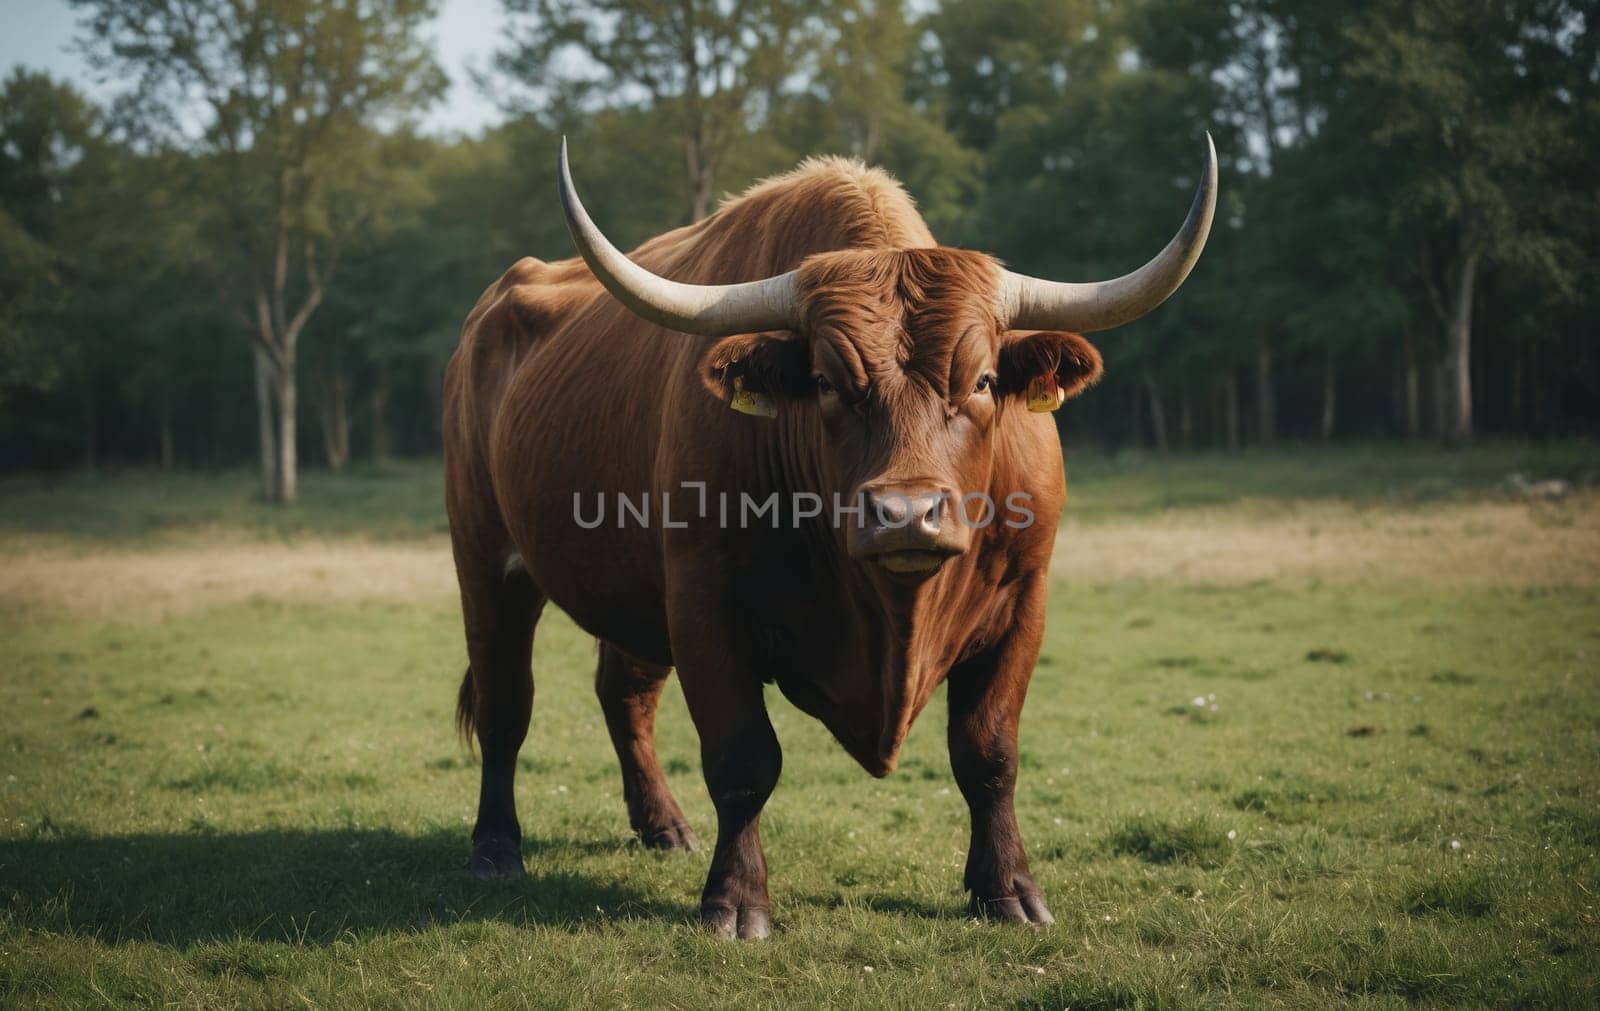 A brown bull with long horns is grazing peacefully in a grassy field, surrounded by green plants and tall trees in the natural landscape